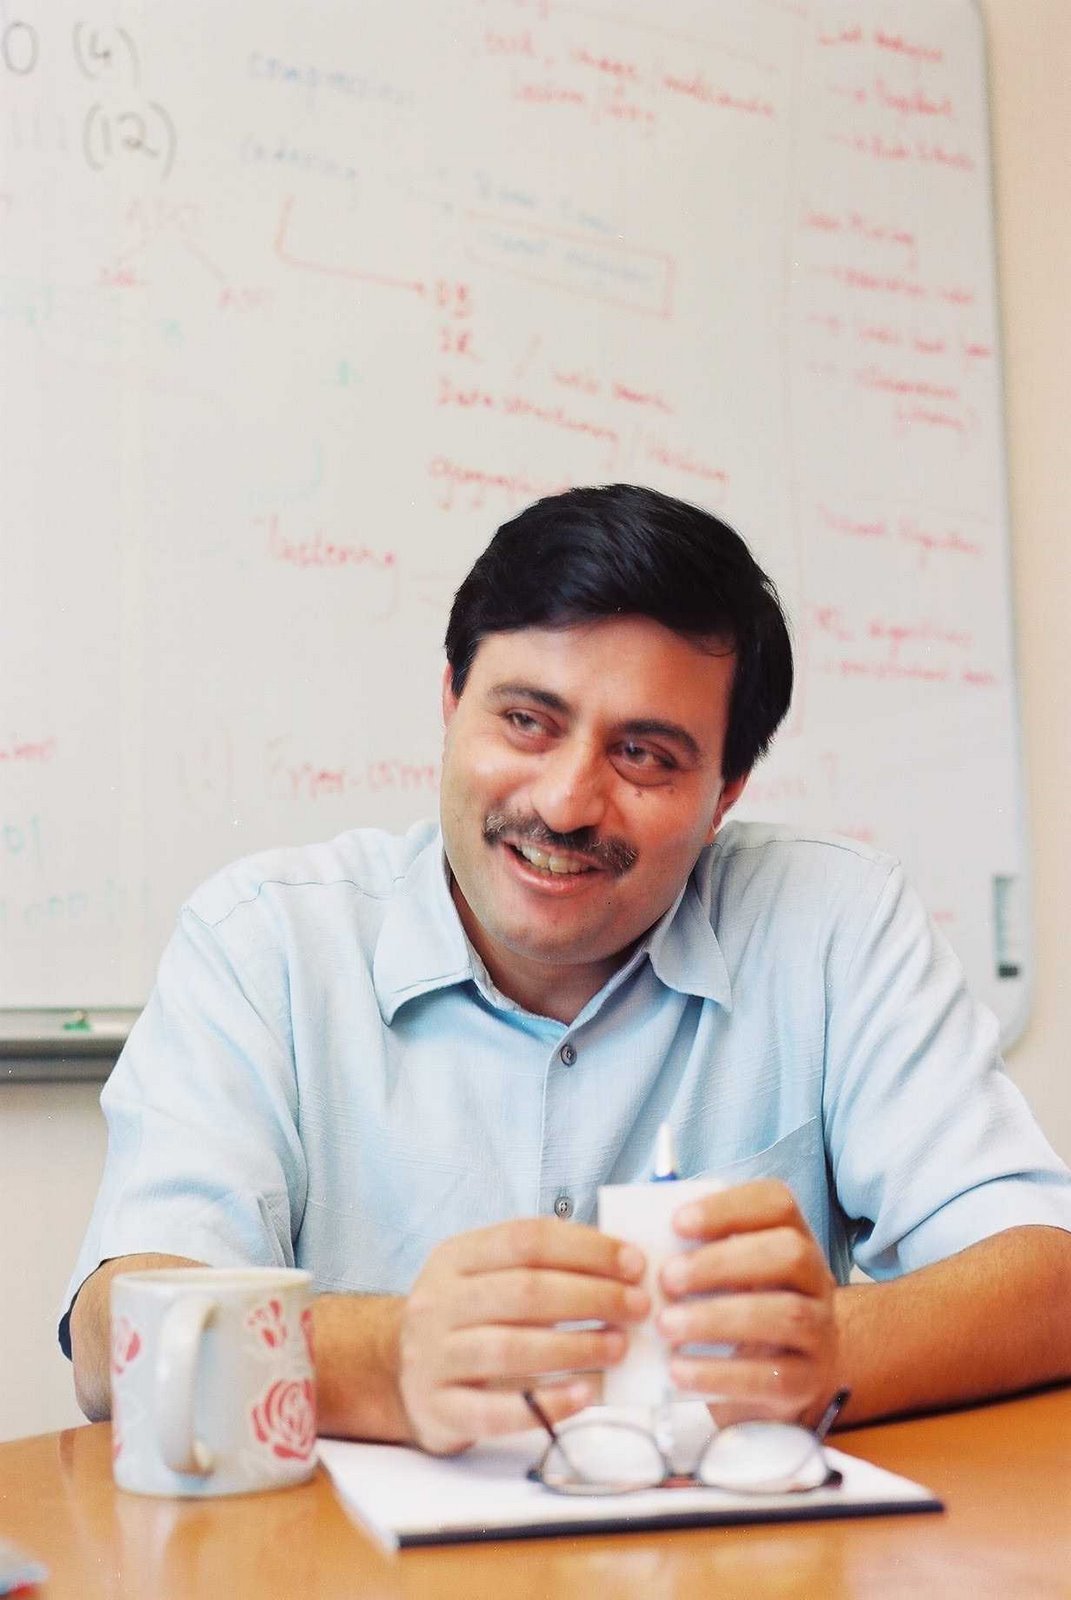 Rajeev Motwani was a mentor to Larry Page and Sergey Brin, founders of Google